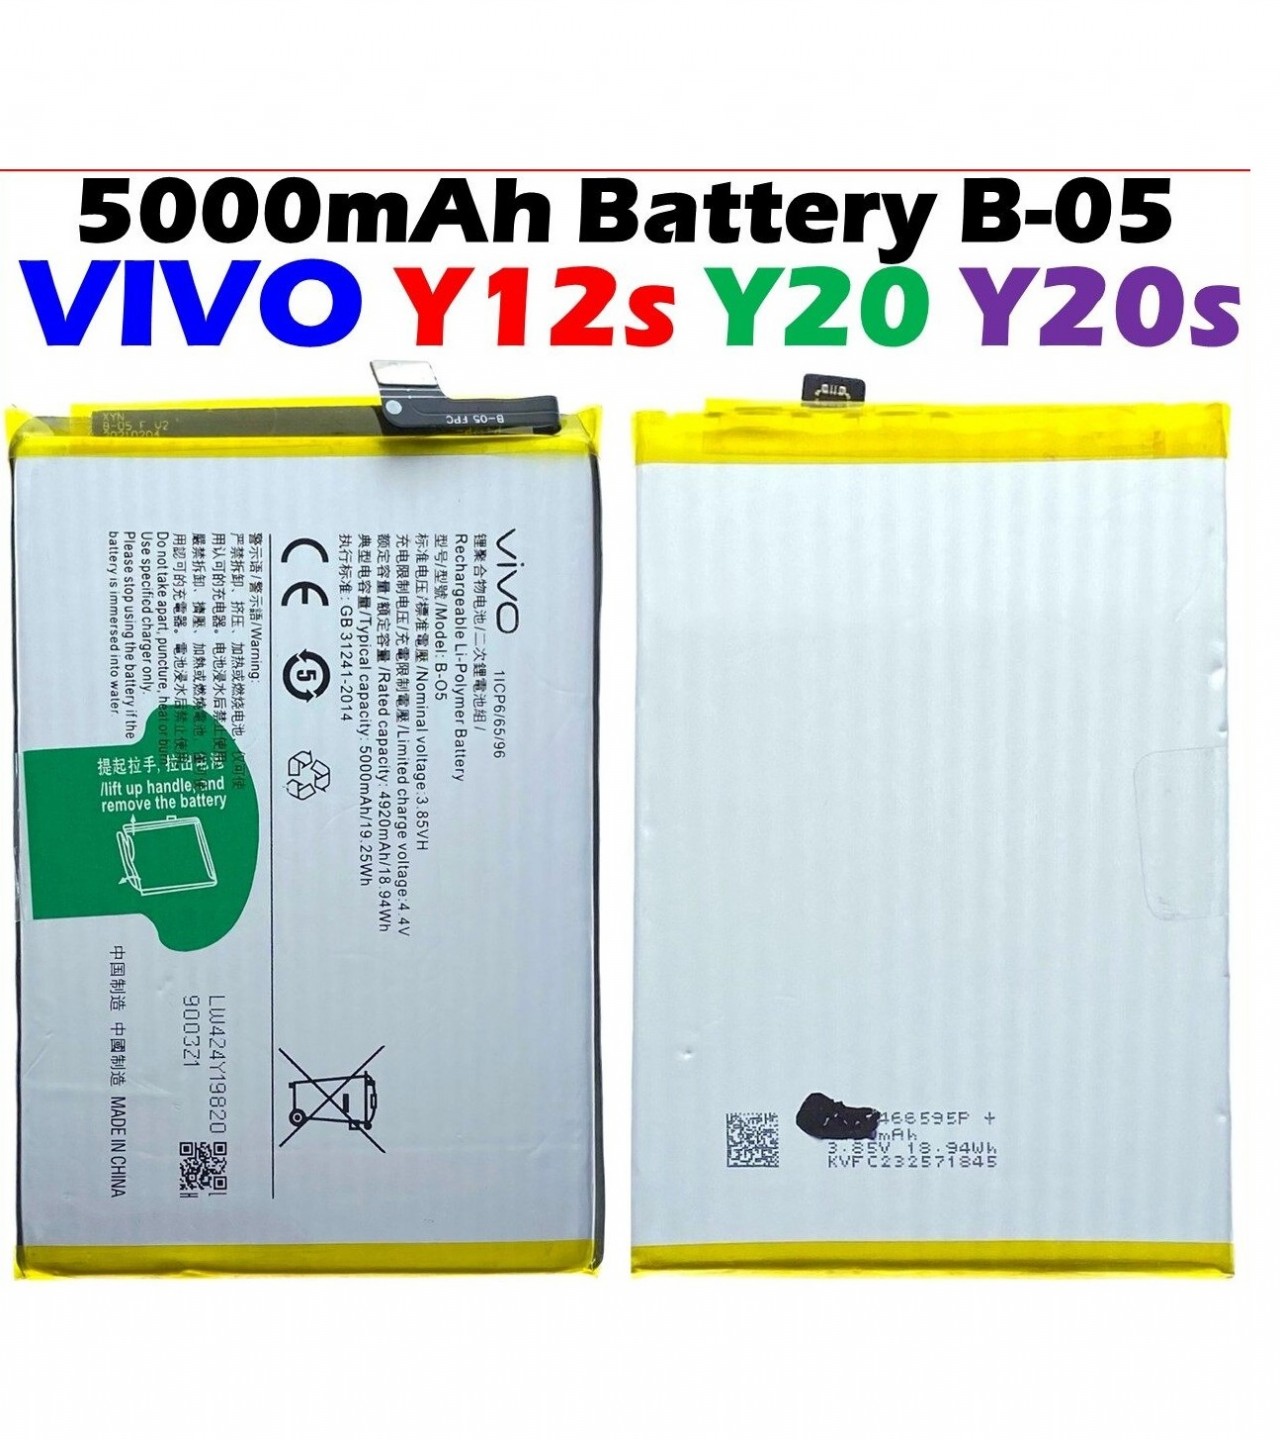 Vivo Y20 , Y20s , Y12s Battery Replacement B-05 Battery With 5000mAh Capacity - Silver